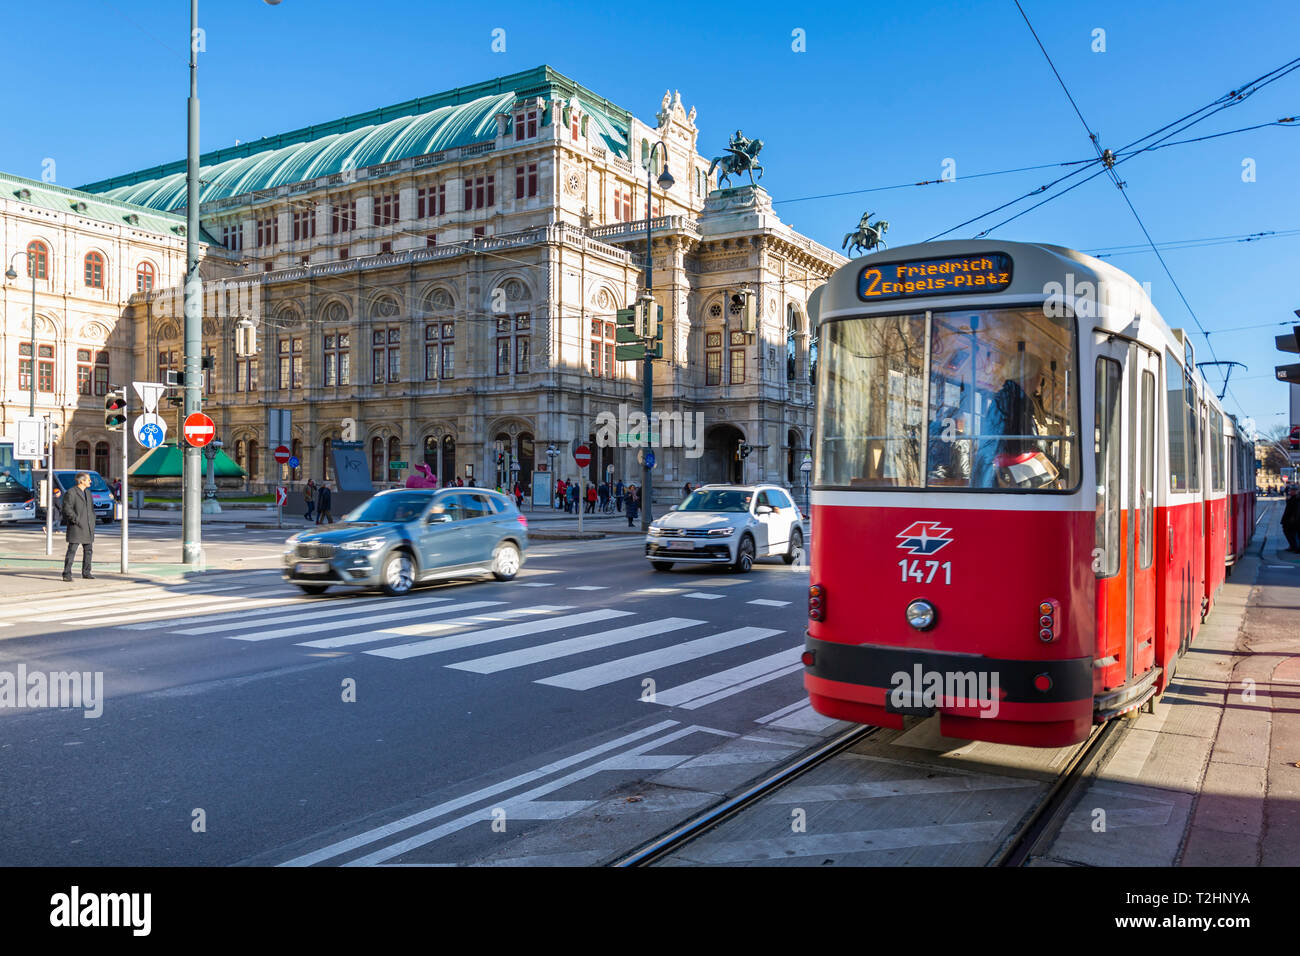 View of Royal Opera House and city tram on Opernring, Vienna, Austria, Europe Stock Photo